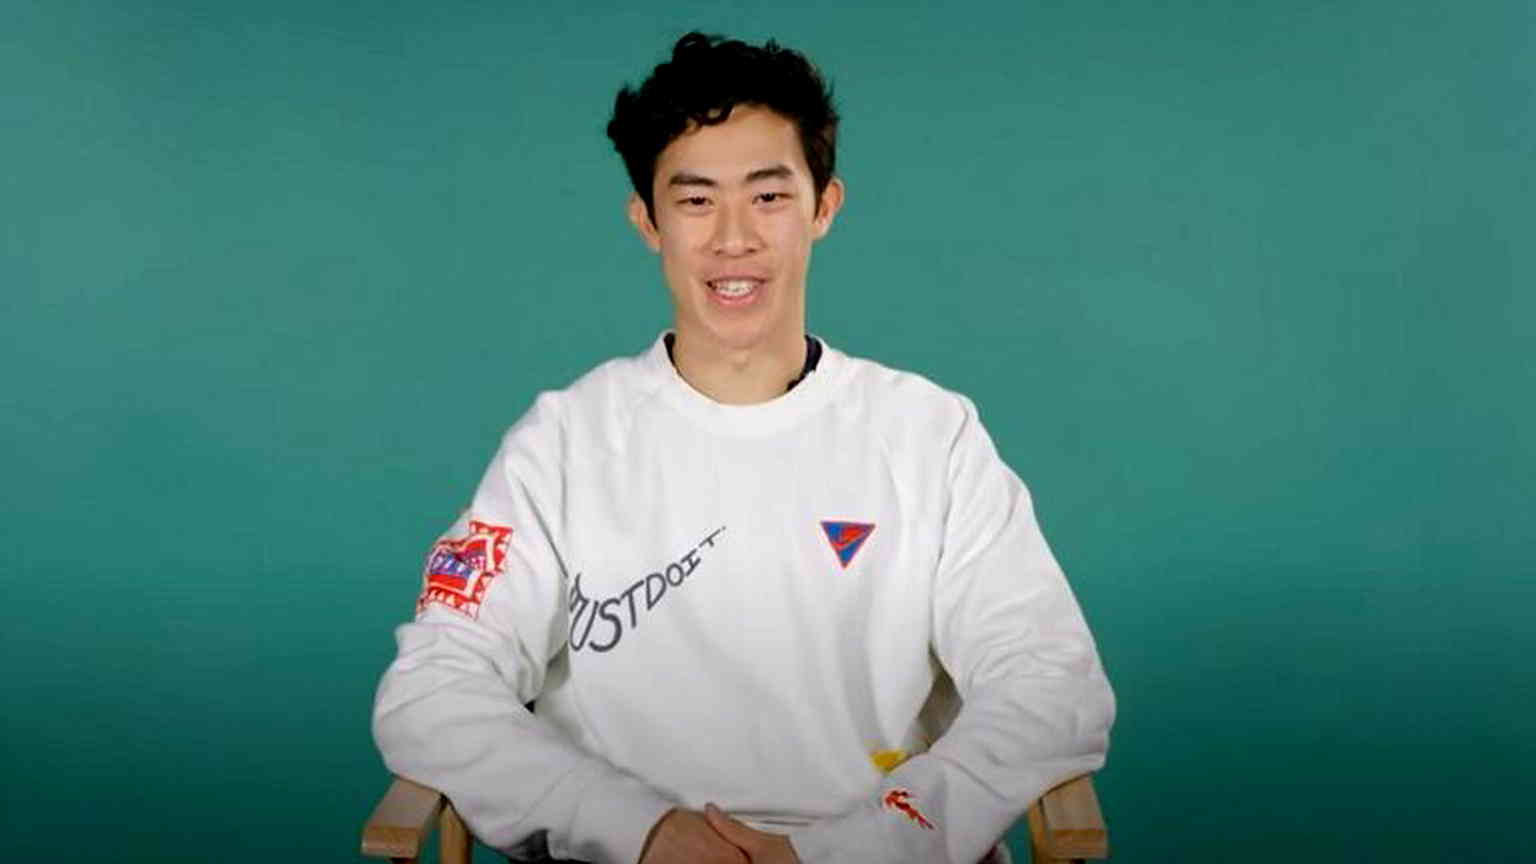 Nathan Chen pushes for Salt Lake City to be 2030 Winter Games host